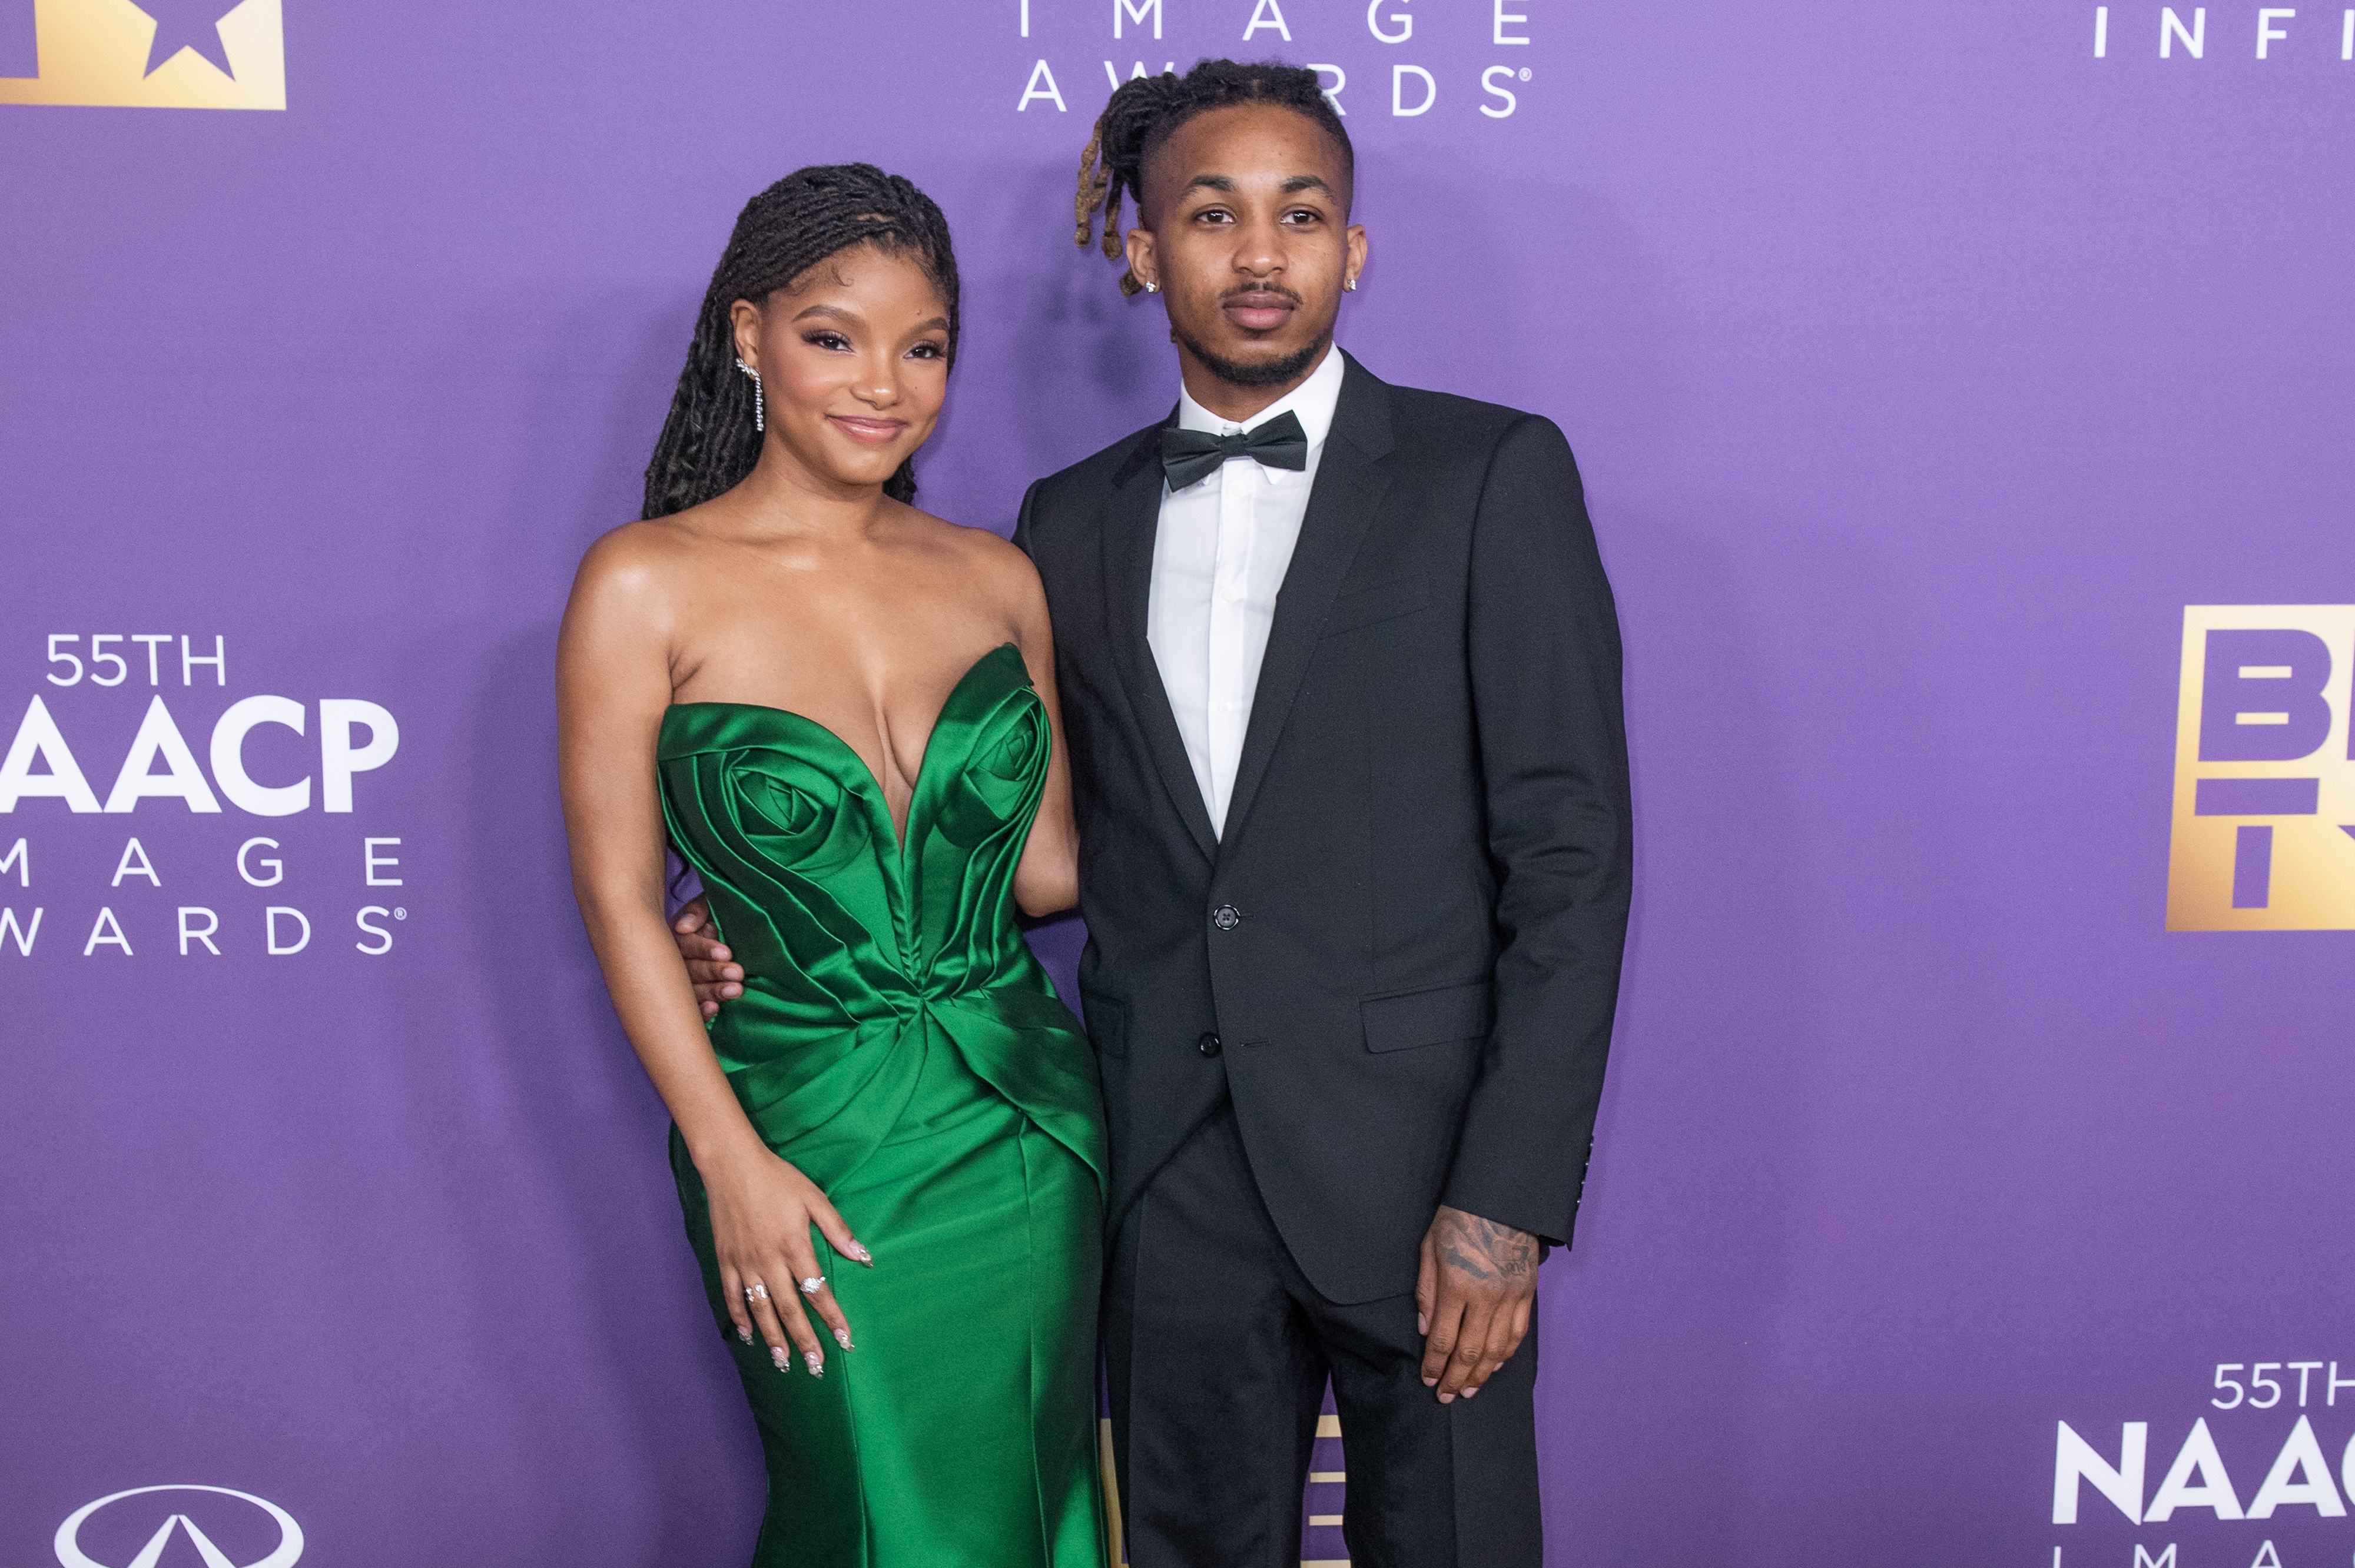 Halle Bailey and DDG on the red carpet together. Halle is wearing a strapless dress with a sweetheart neckline and DDG is wearing a tux